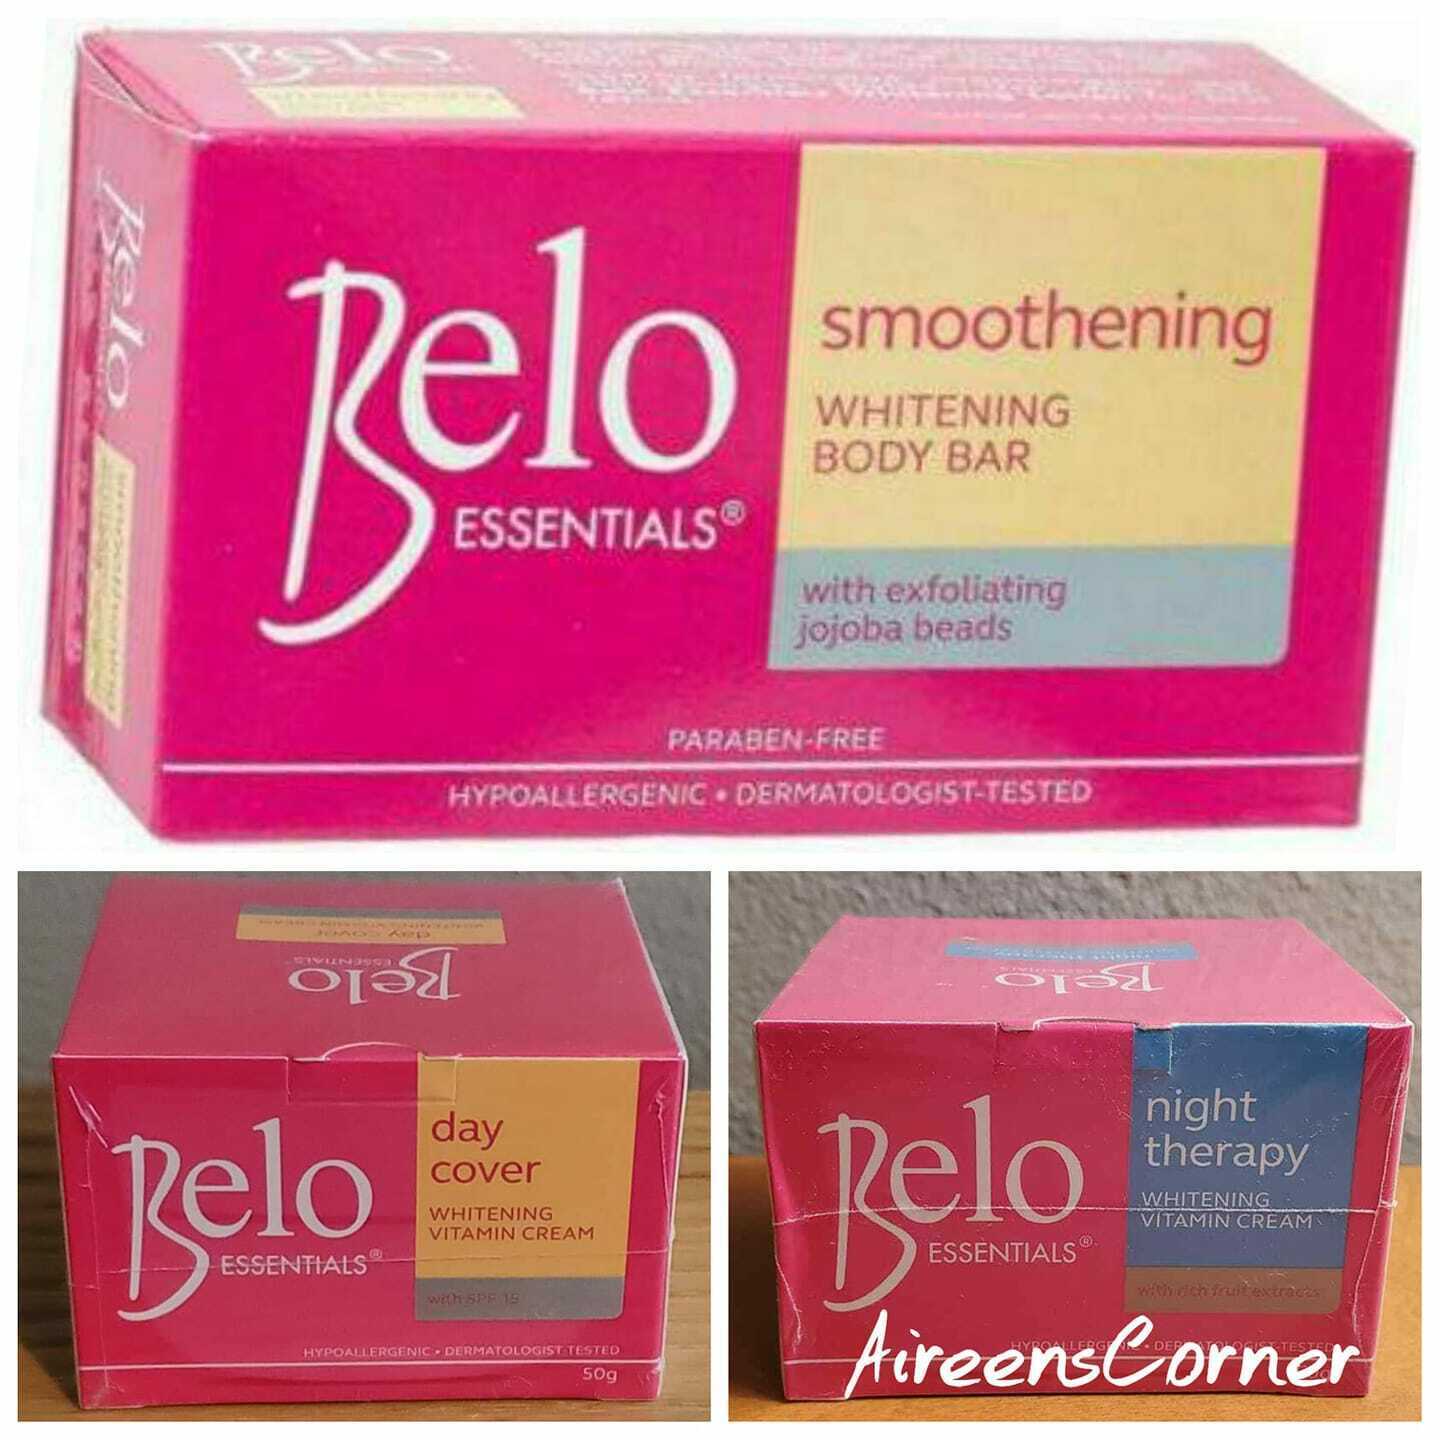 BELO Essentials Day Cover/Night Therapy Whitening Vitamin Face Cream & Bar Soap - $10.88 - $21.77